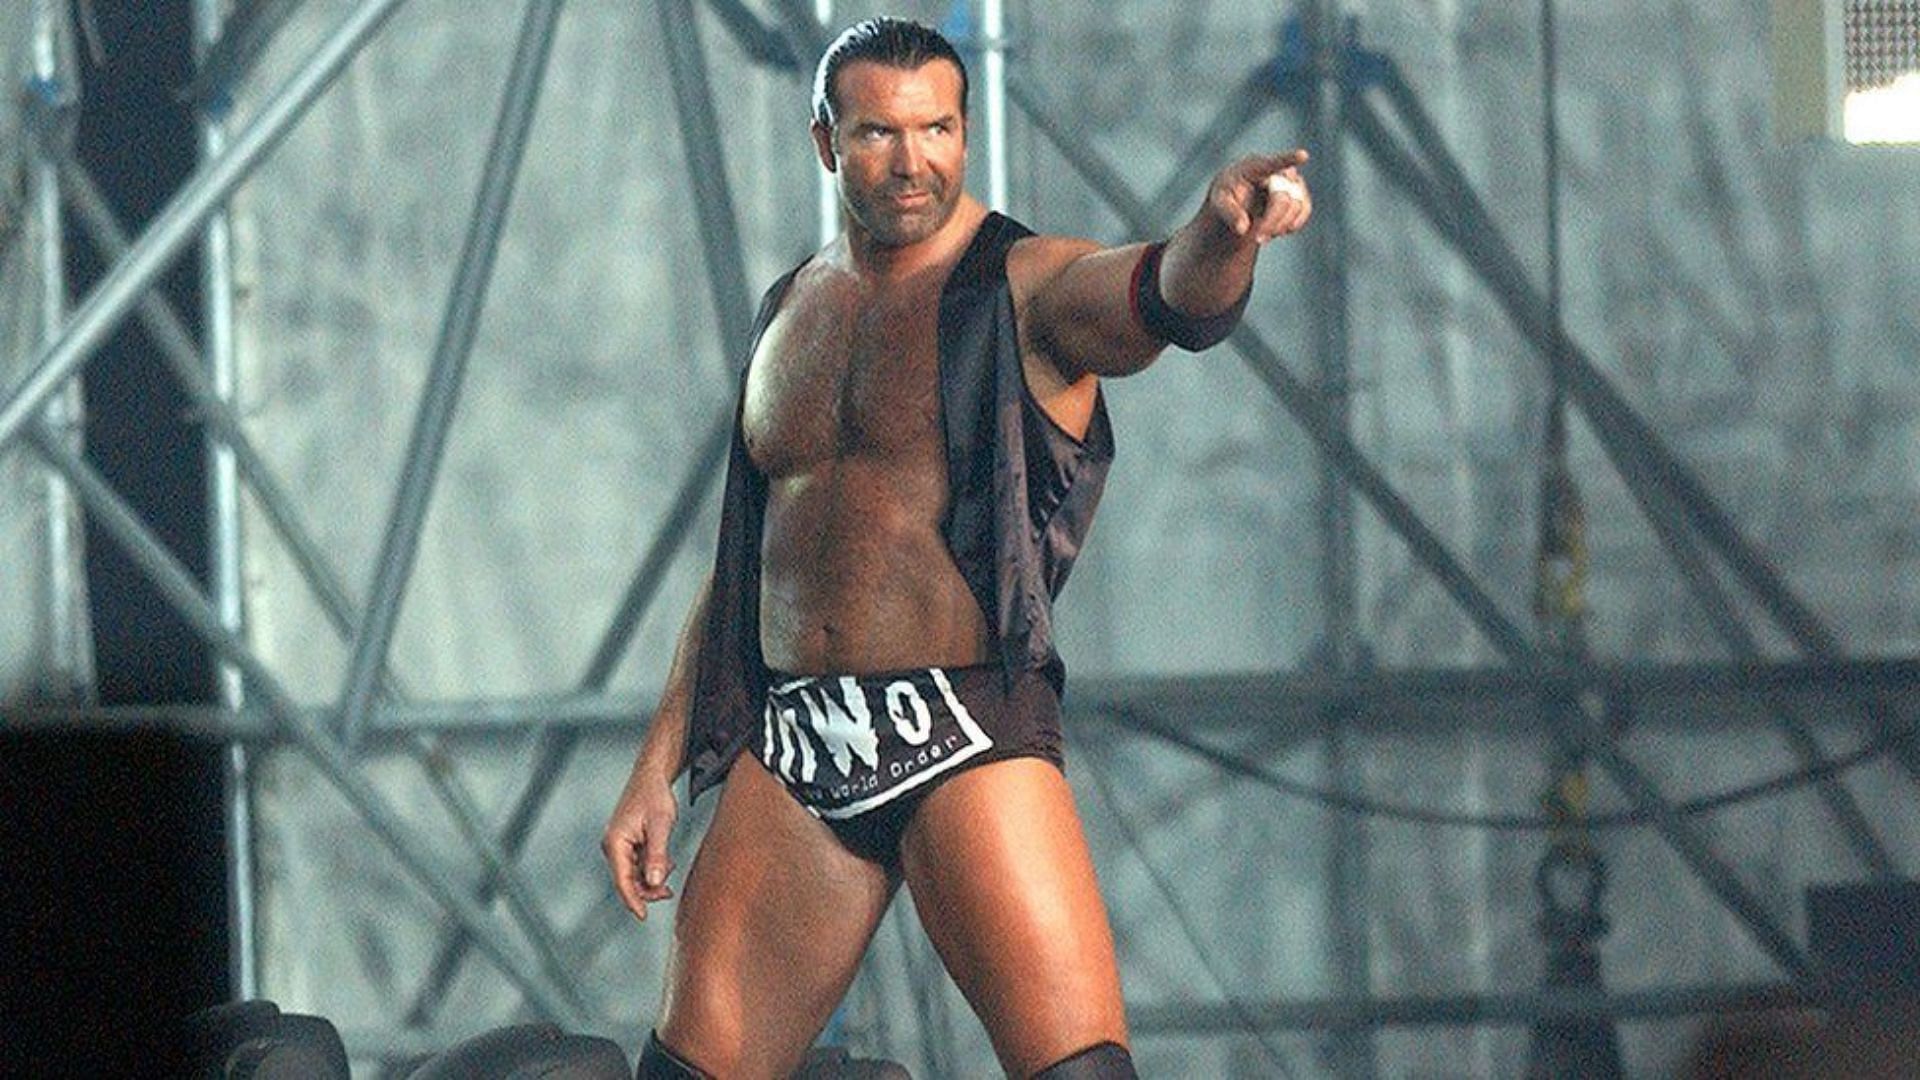 ...on-screen rival Scott Hall, who sadly passed away earlier this week. 